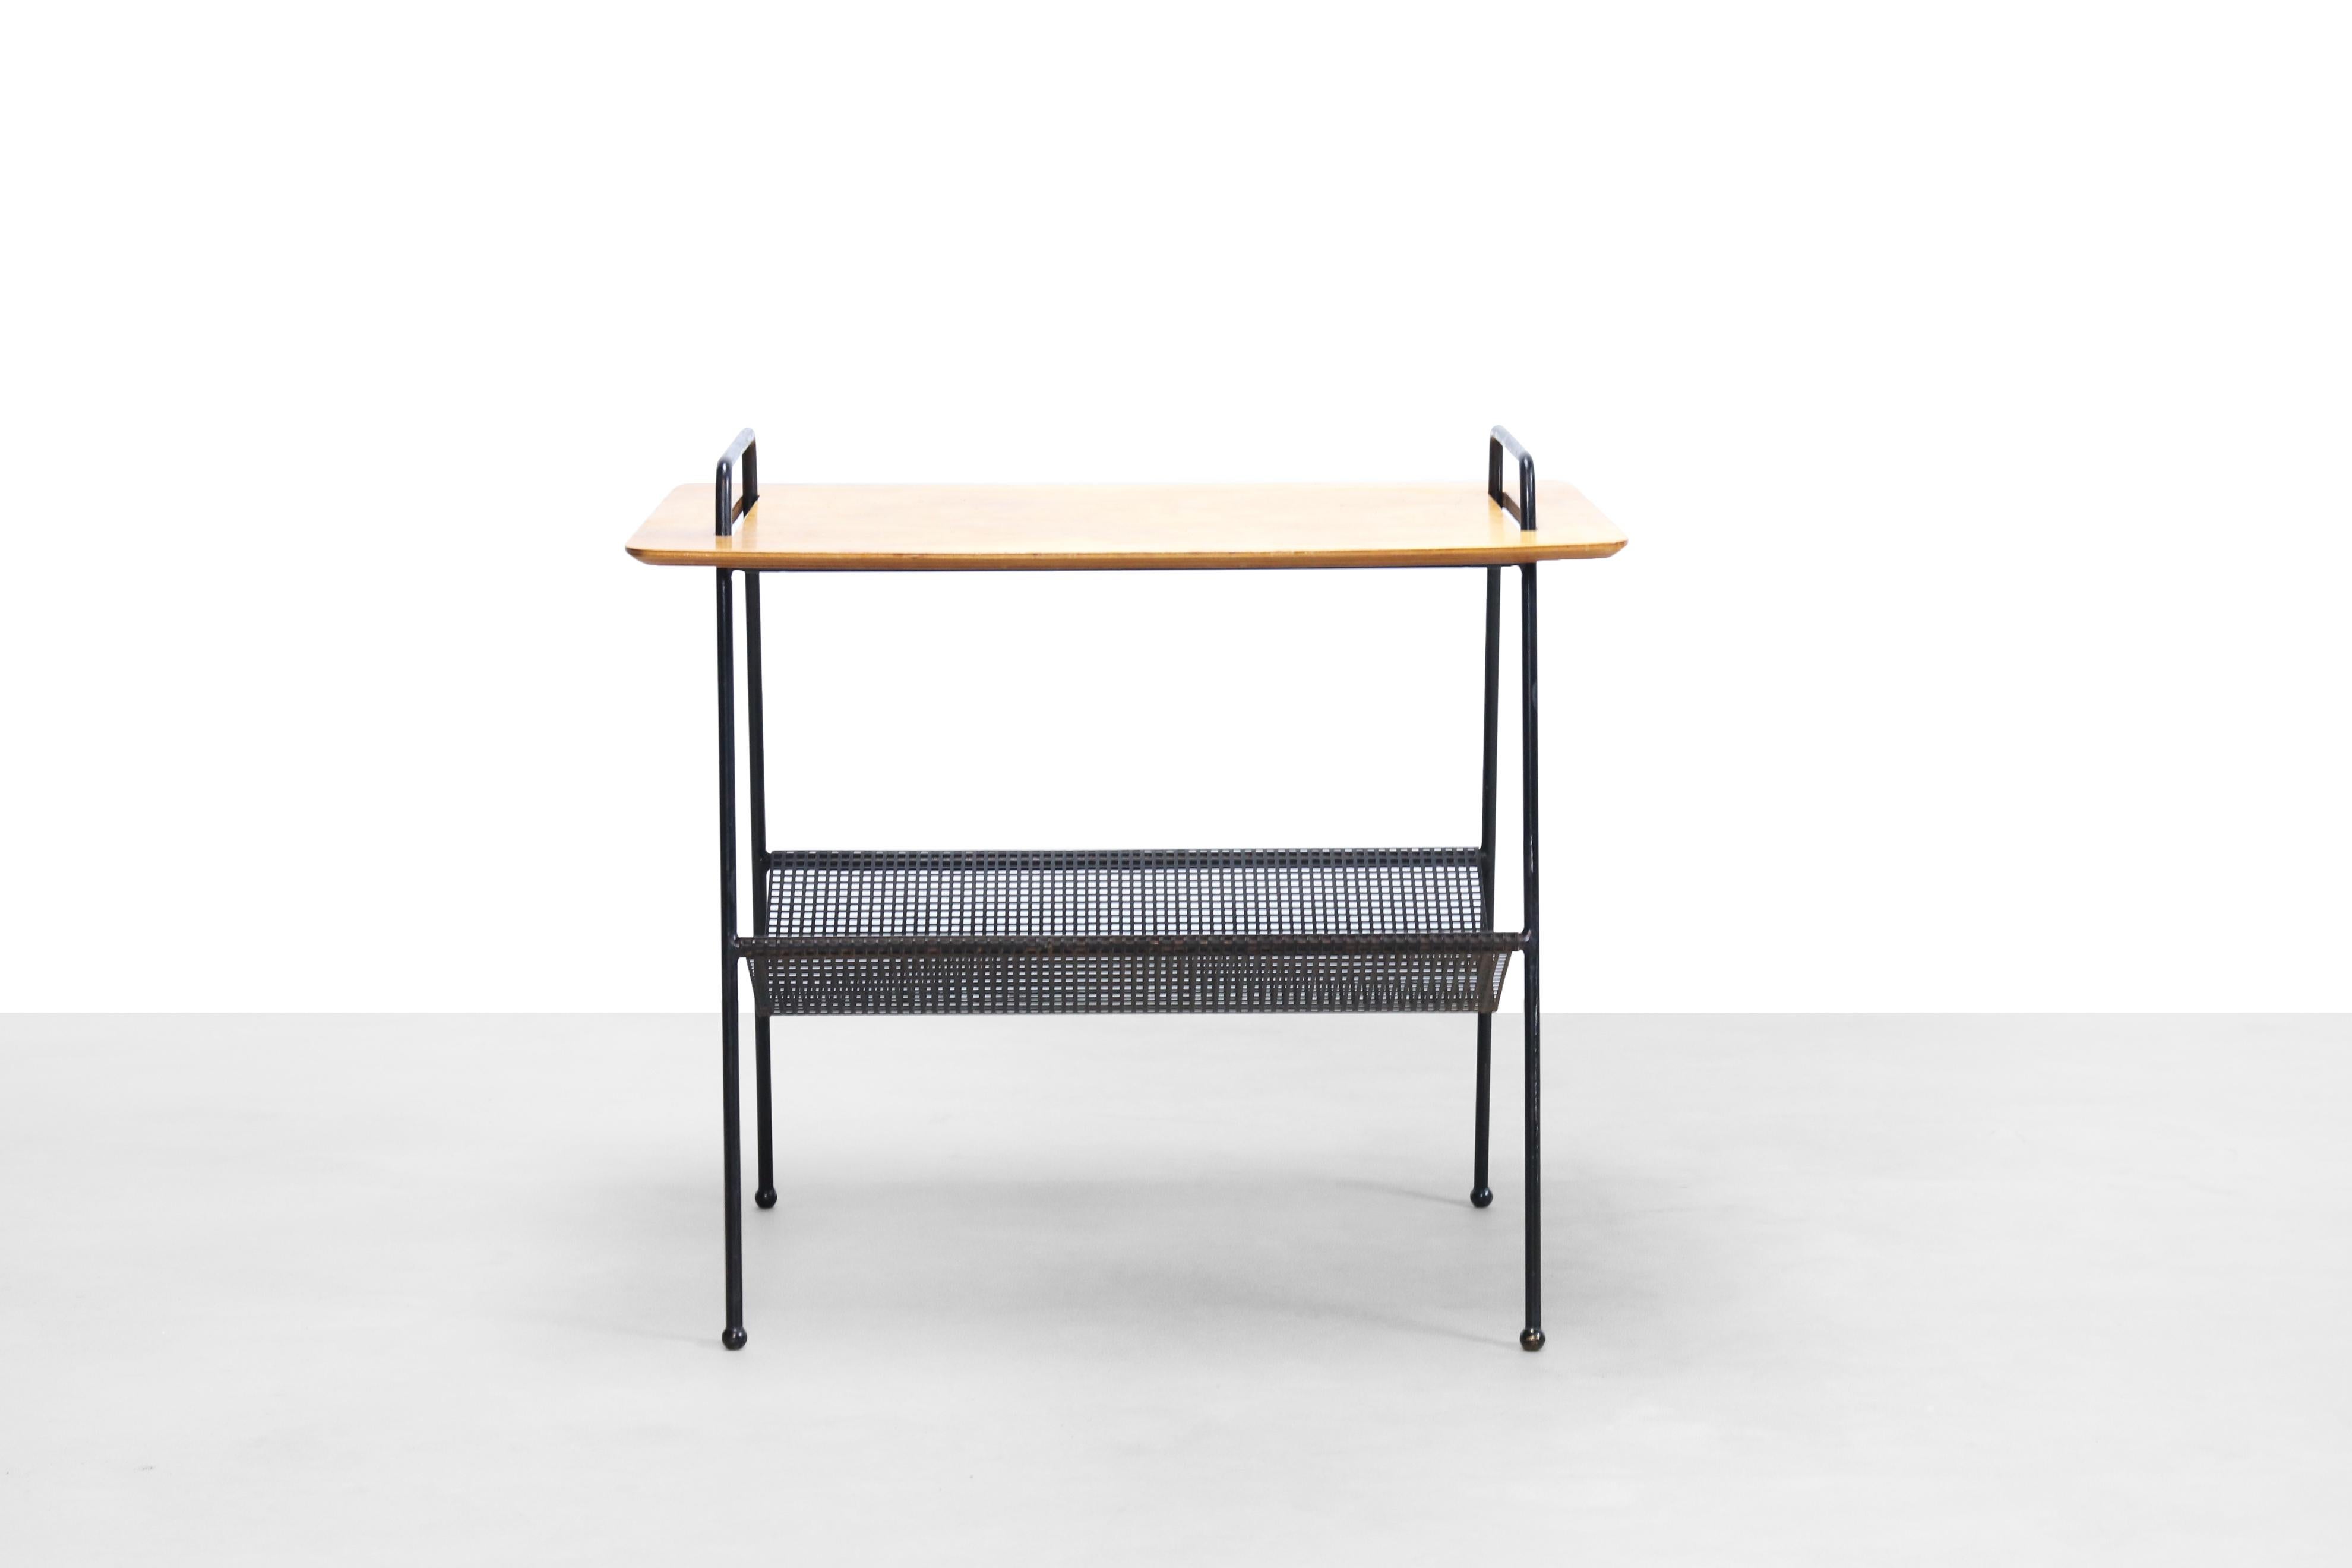 Rare side table with magazine rack by Cees Braakman for Pastoe, 1953. This is the TM04 from the Combex series. This side table is made of a black lacquered base, black lacquered perforated newspaper / magazine rack and a birch plywood top.